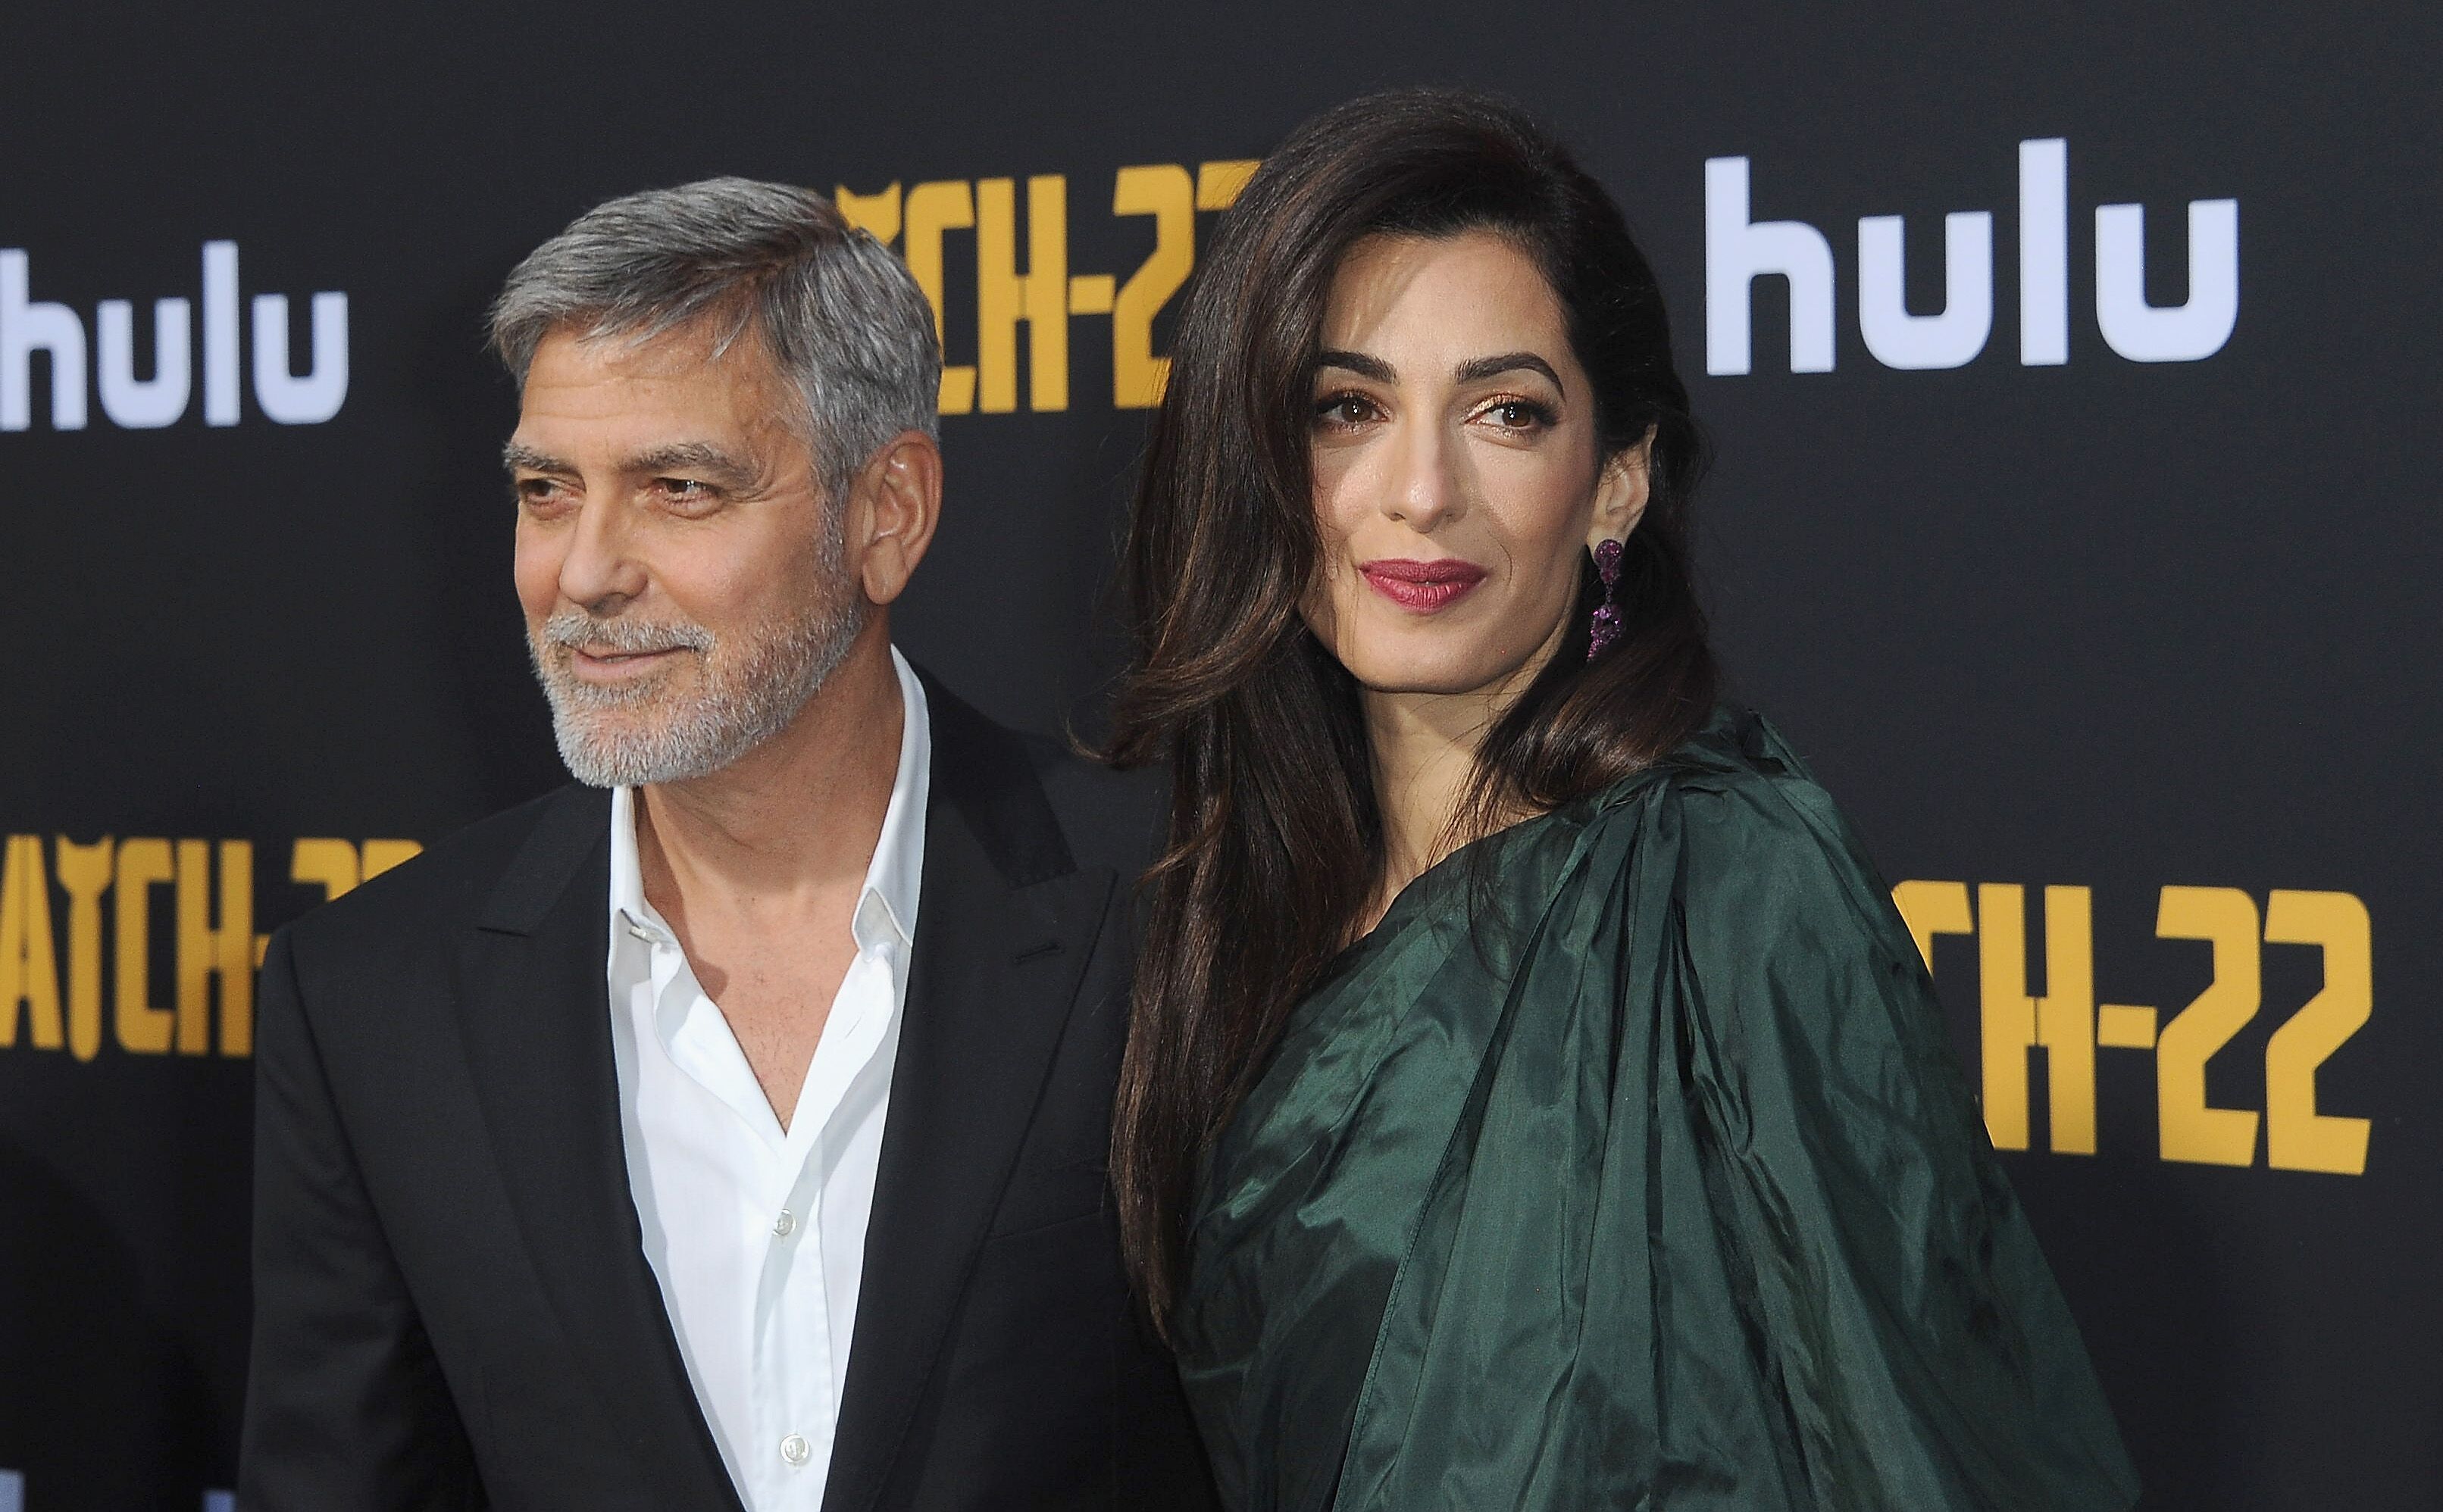 George and Amal Clooney at the Hollywood premiere of "Catch-22" in May 2019 | Photo: Getty Images